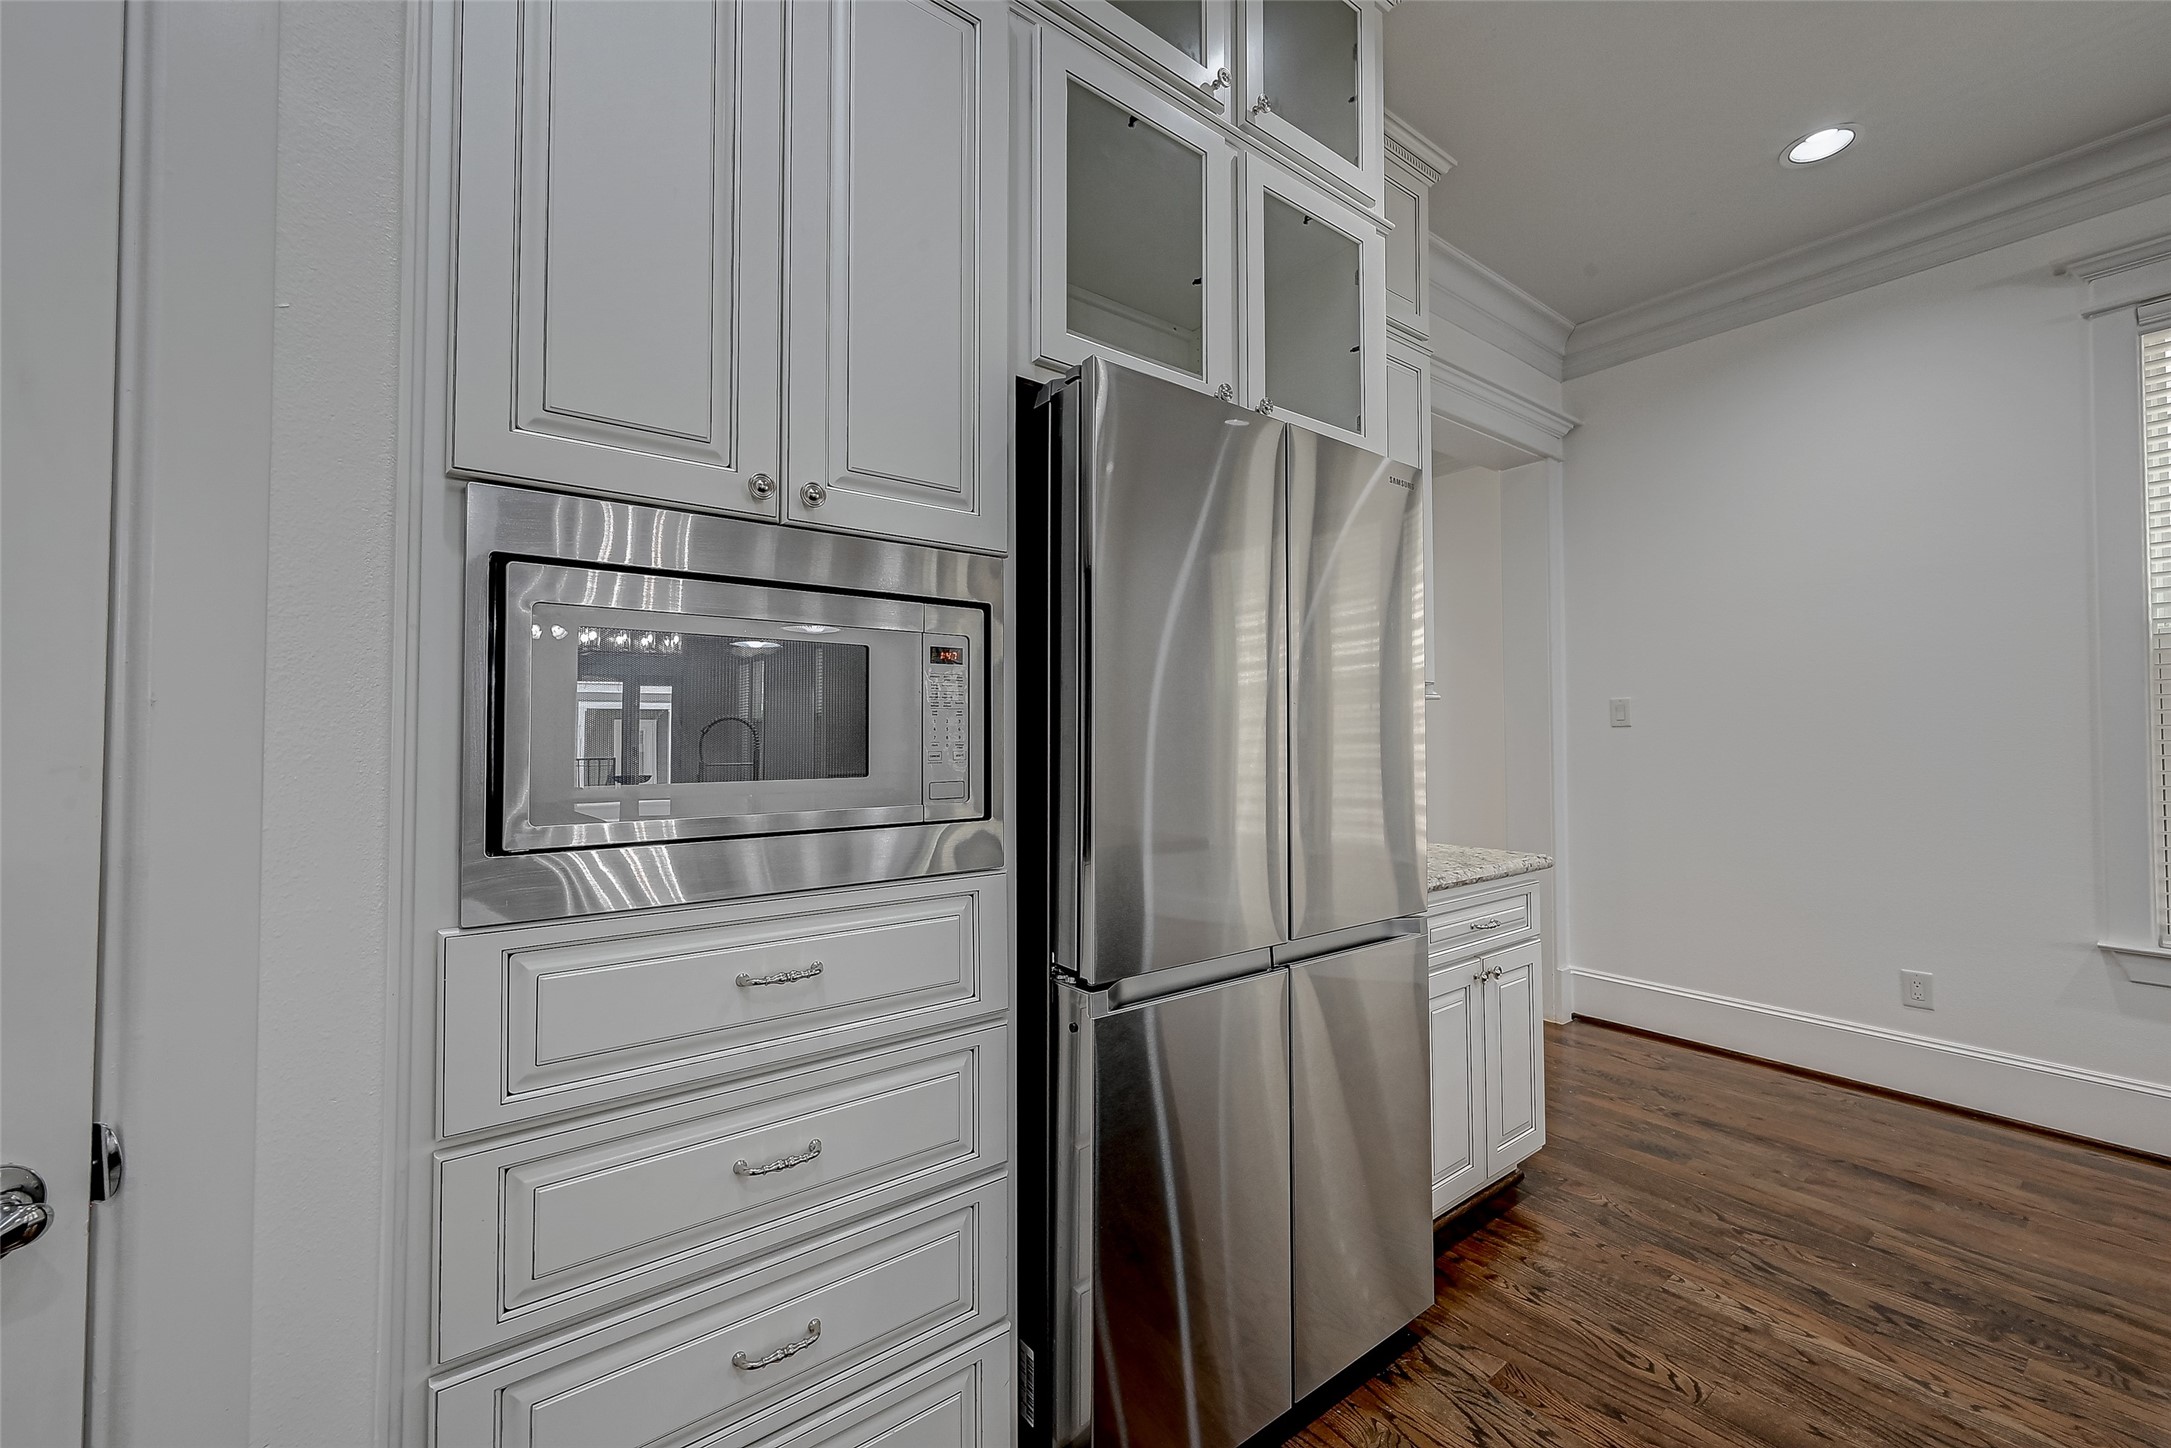 The walk-in pantry and abundant storage options ensure every tool and ingredient has its dedicated space.